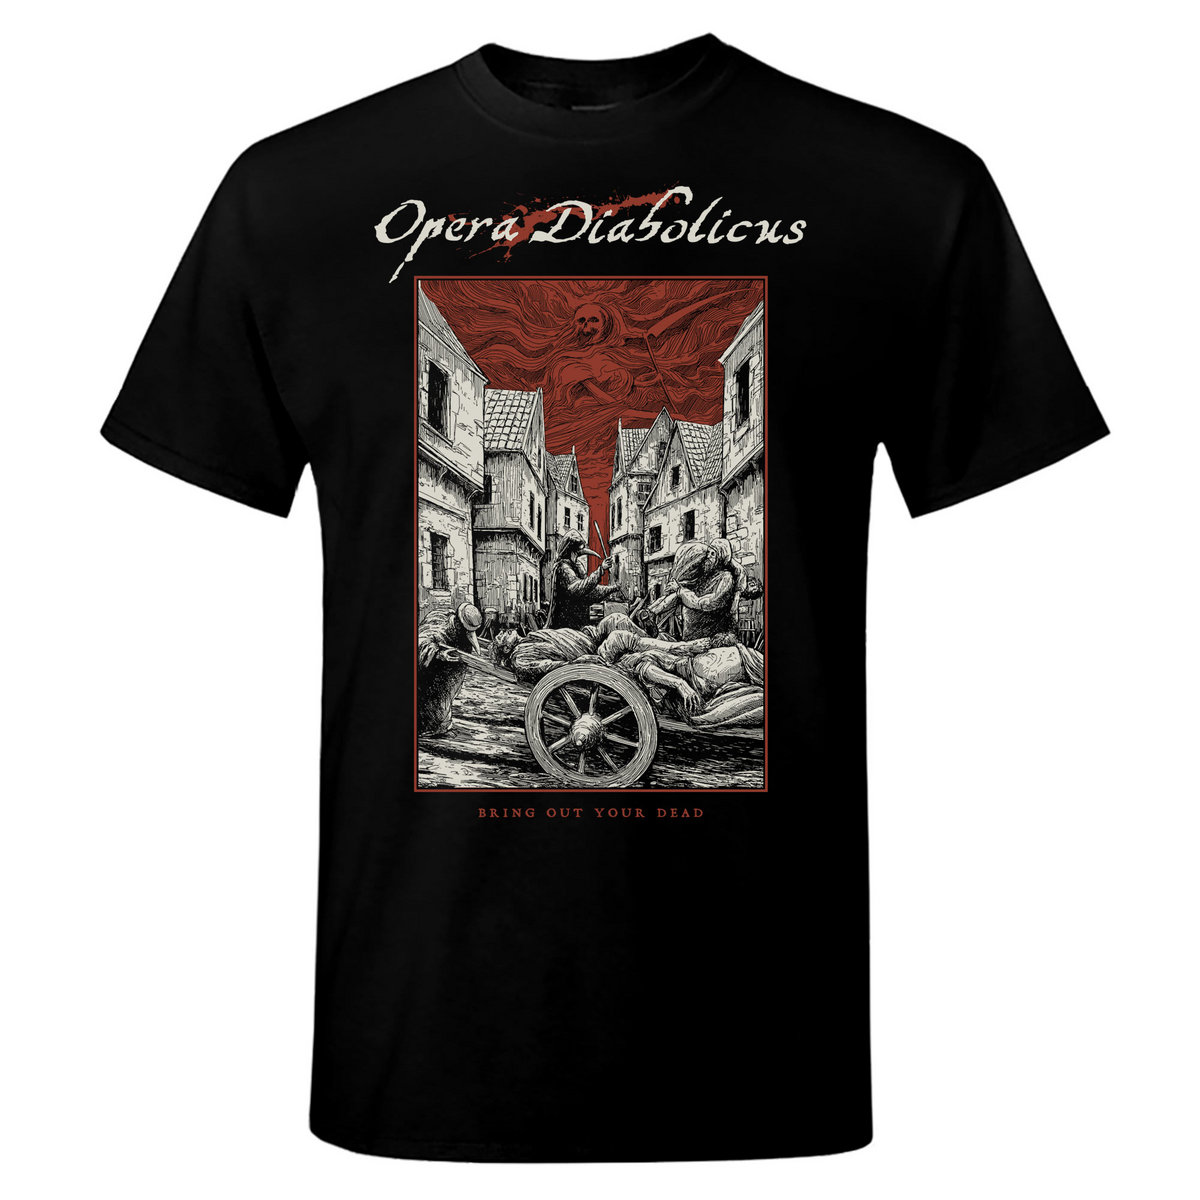 Bring Out Your Dead T-Shirt | Opera Diabolicus